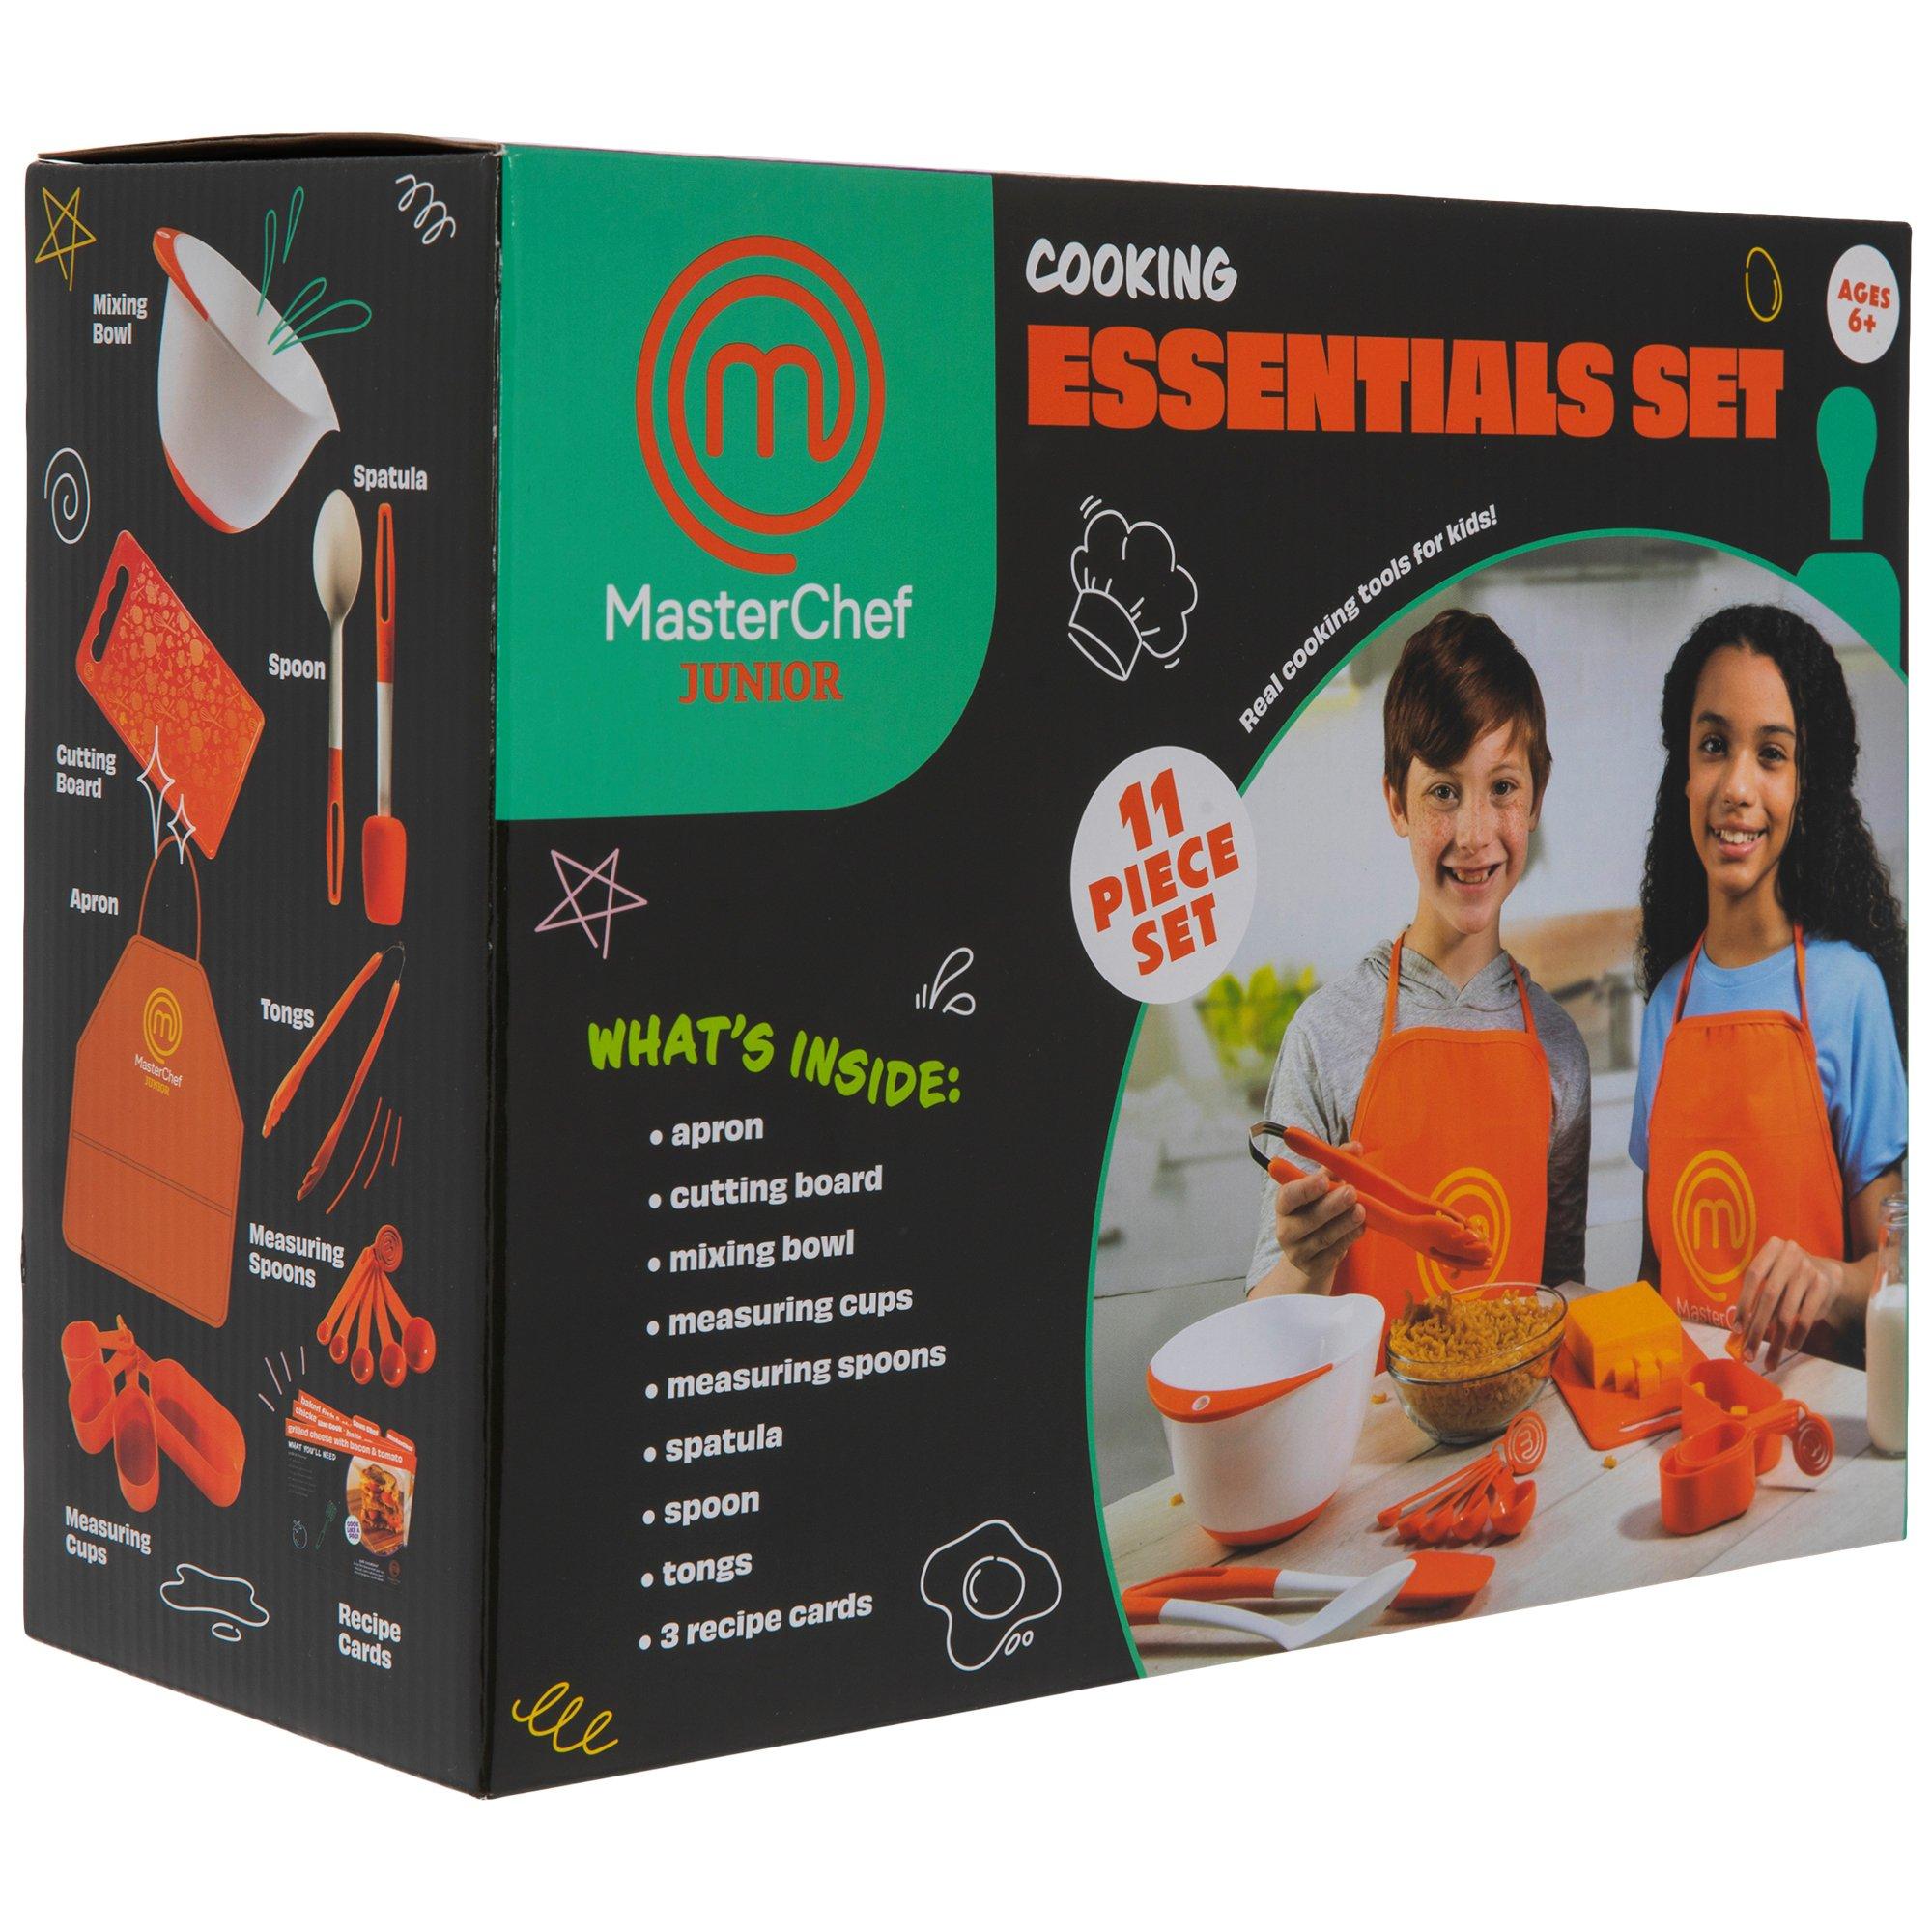 MasterChef Jr. Cooking Essentials Set - 9 Pc, Real Cookware for